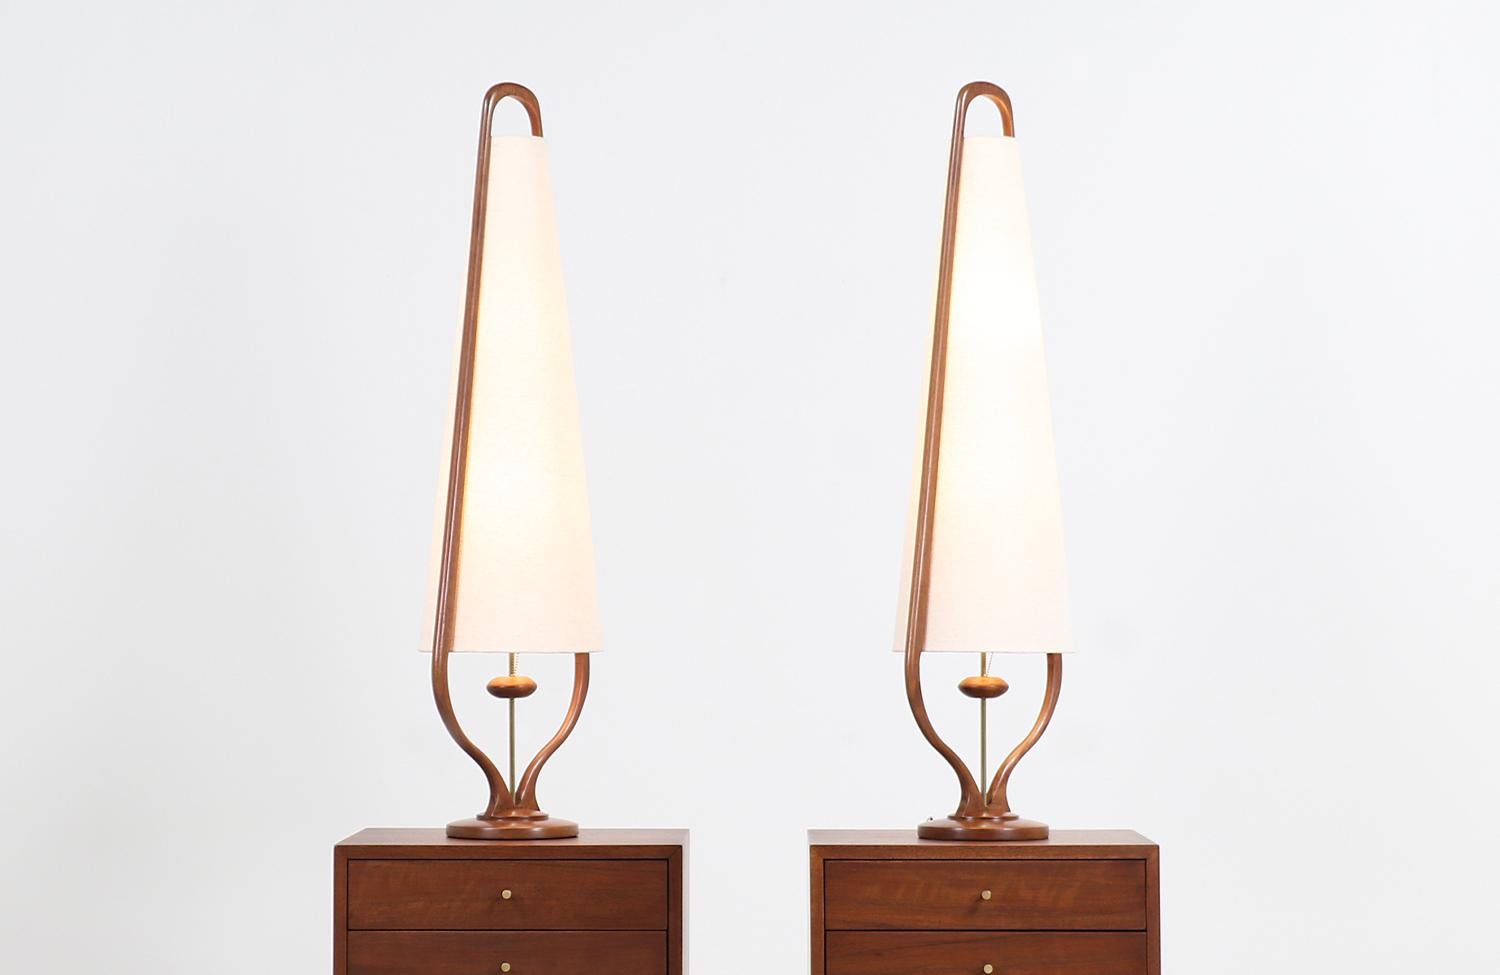 American Mid-Century Modern Sculpted Walnut and Brass Table Lamps by Modeline